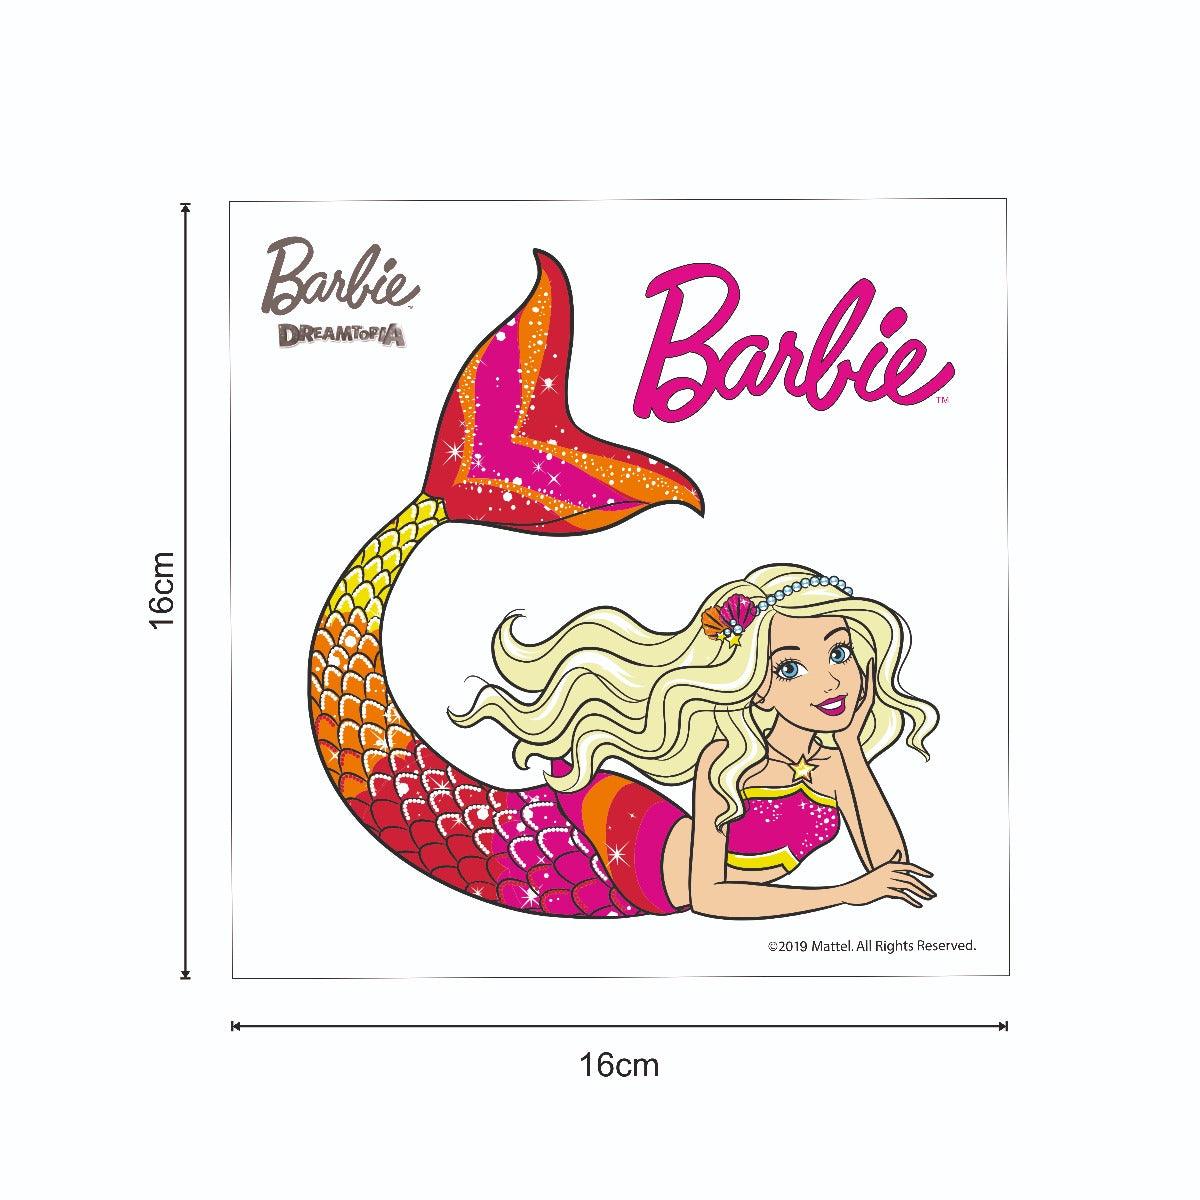 Barbie My First Colouring Kit